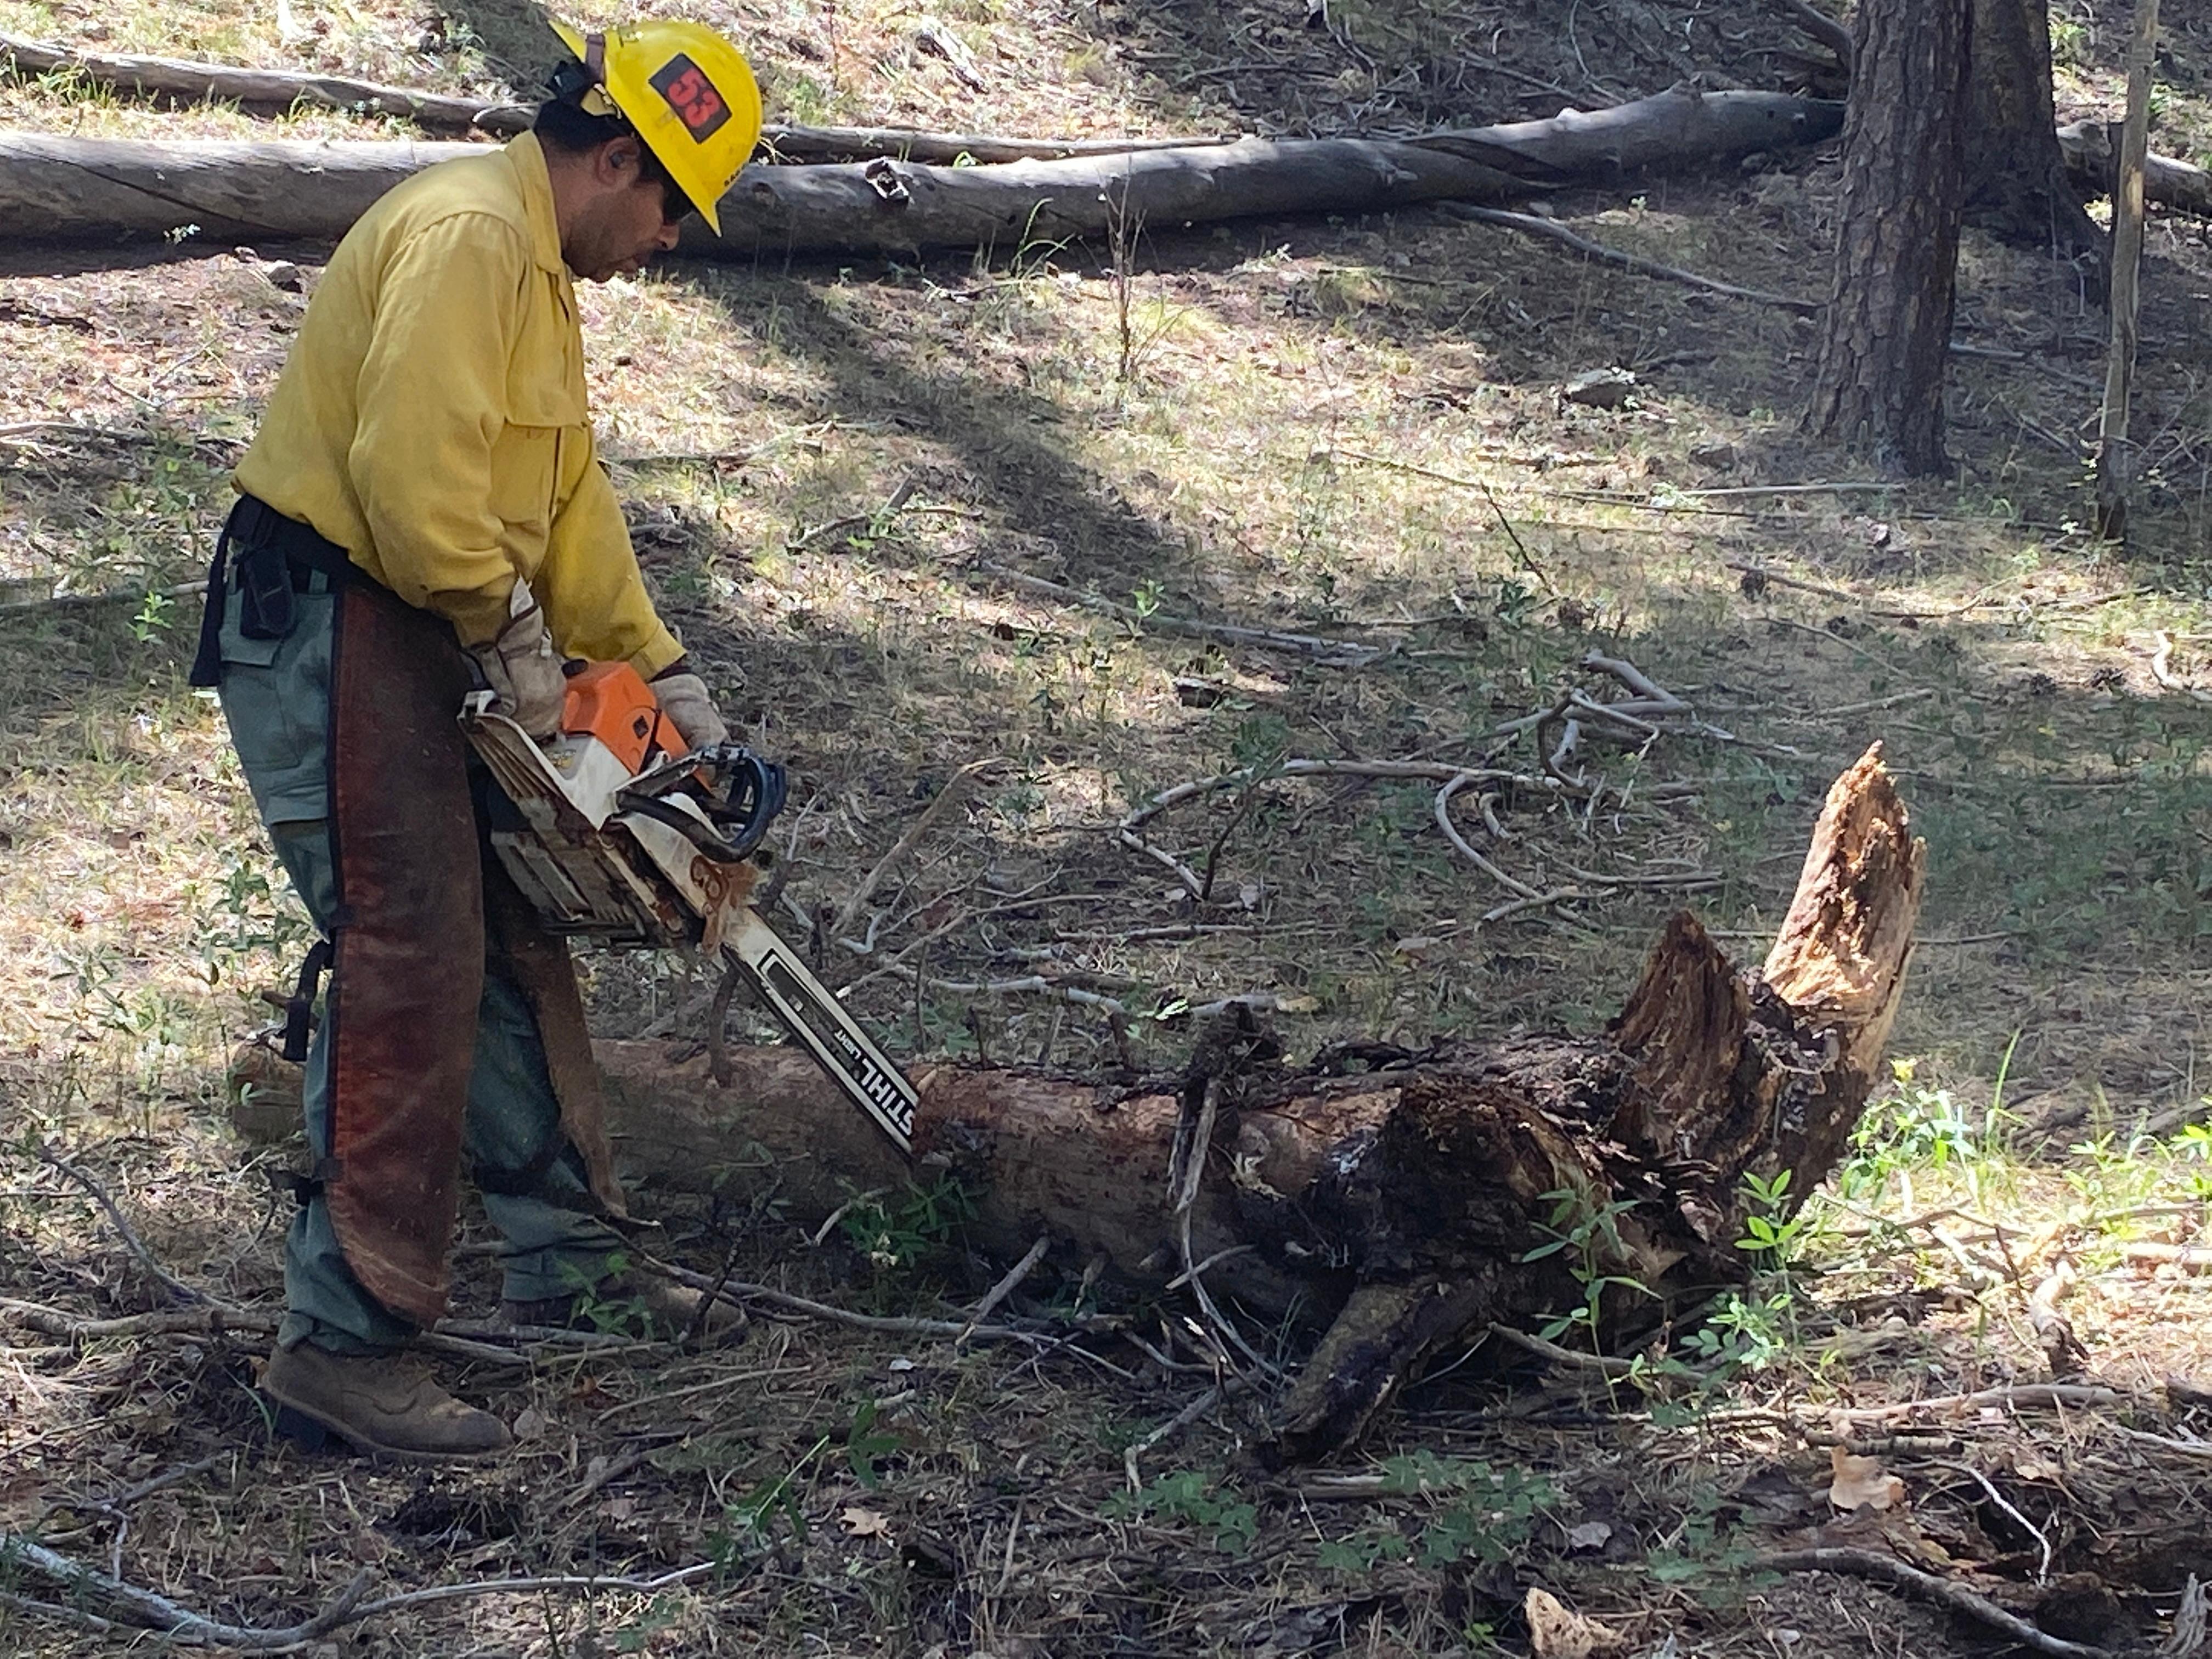 Firefighter with yellow shirt, yellow hardhat, green pants and orange chaps.  Firefighter holds a chainsaw and is cutting a log down on the ground.